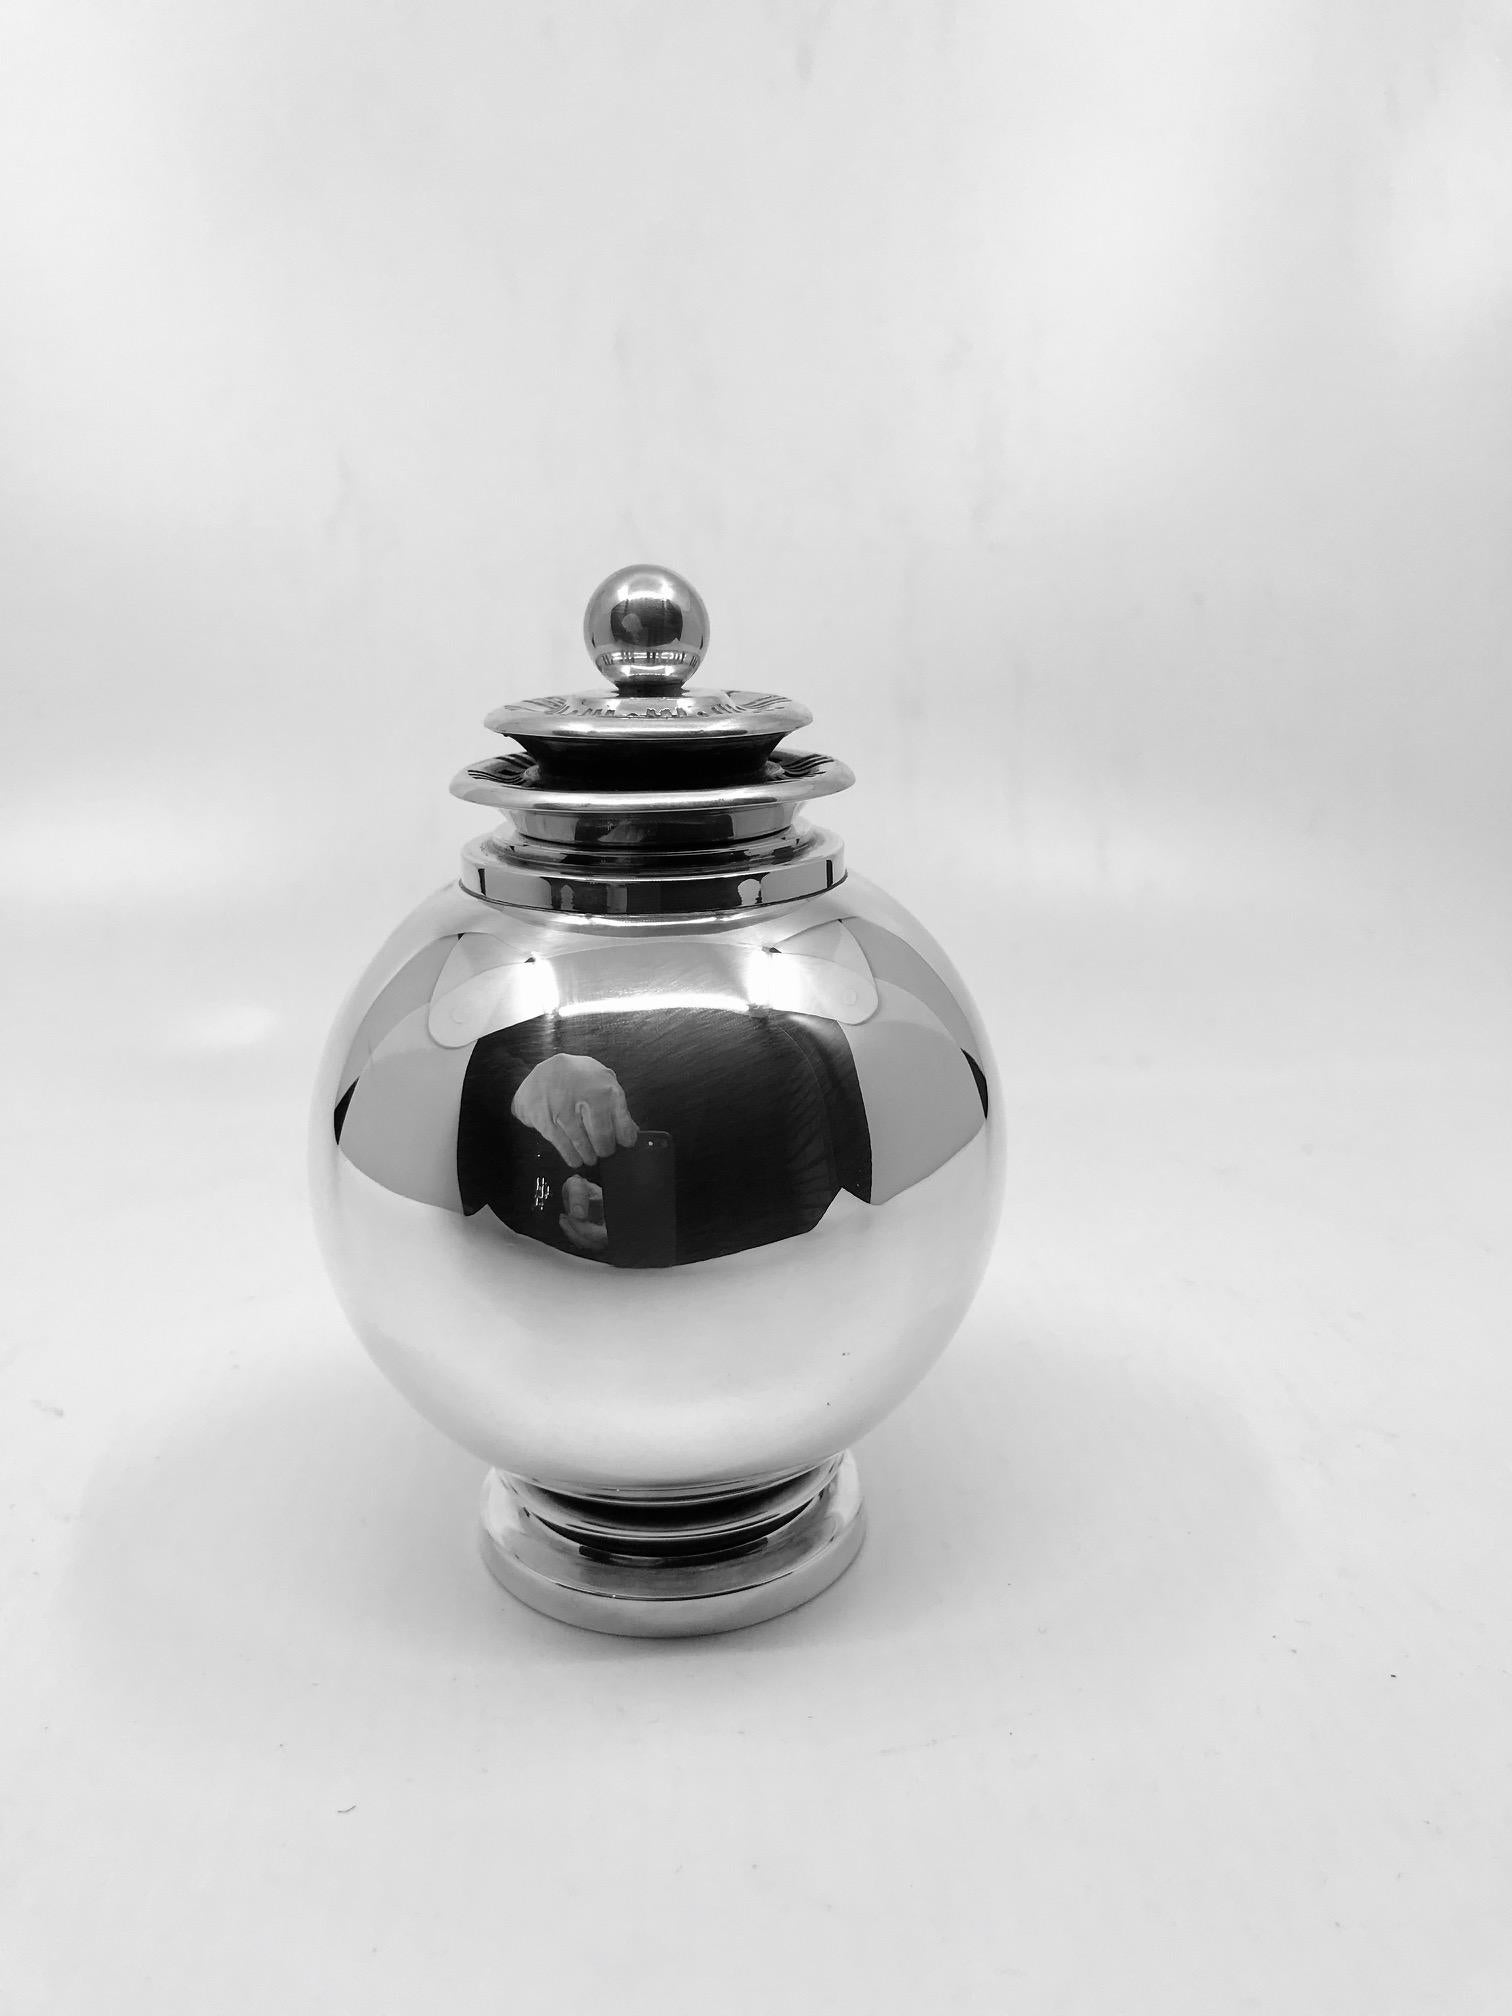 Vintage sterling silver Georg Jensen sugar caster, design #645 by Harald Nielsen from circa 1932.
Measures 4 3/4? (12cm) in height.
Vintage Georg Jensen hallmarks from 1925-1932, the earliest possible for this design.